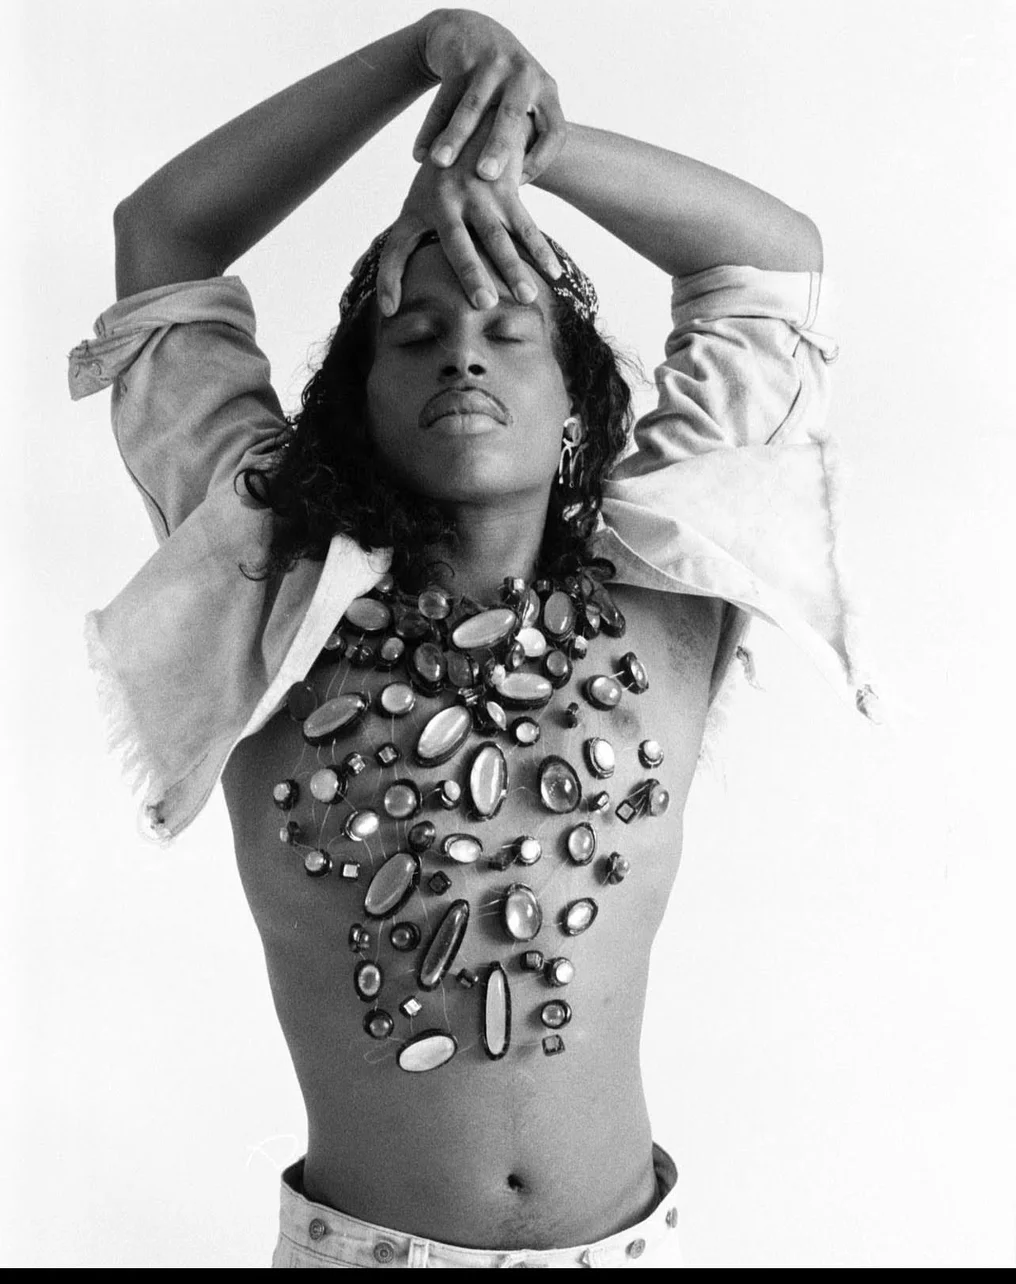 Willi Ninja vogues for the camera, with his arms and hands above his head. He looks upward with his eyes closed, appearing reverant as his bare torso is adorned in an intricate bodysuit by French fashion designer Thierry Mugler made of large glass beads.